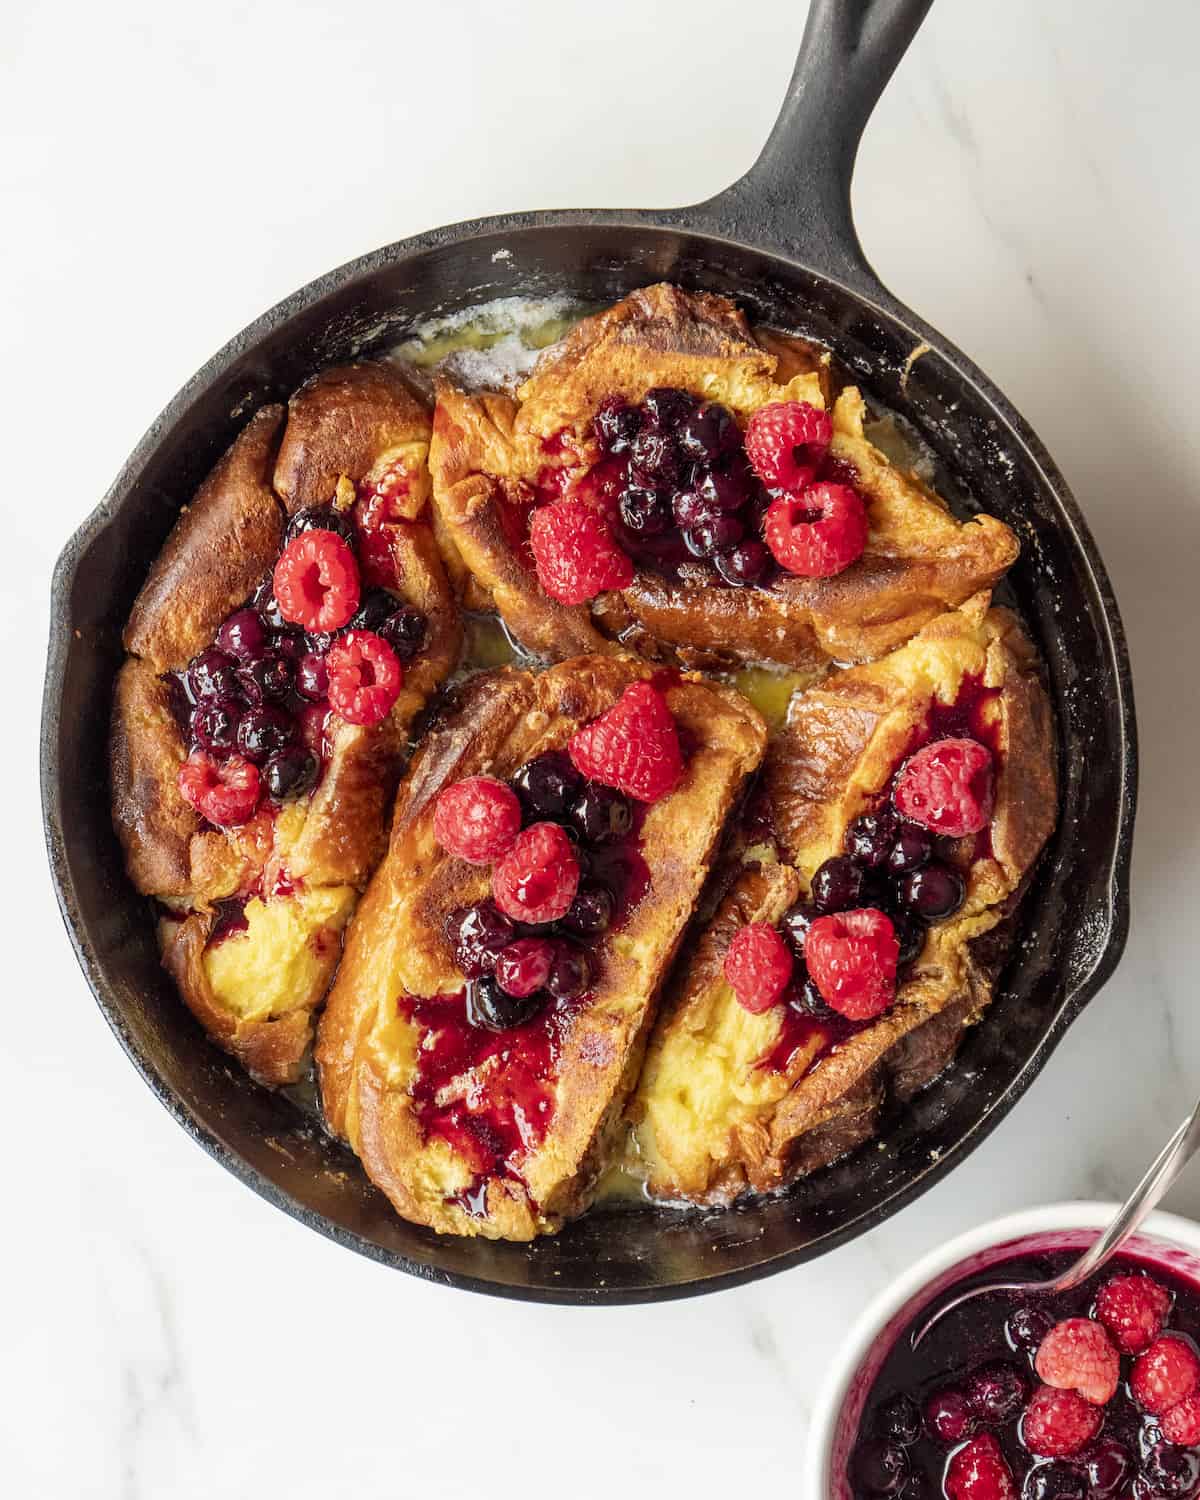 Cooked french toast in a skillet, with berry compote on top and a bowl of berry compote on the side.